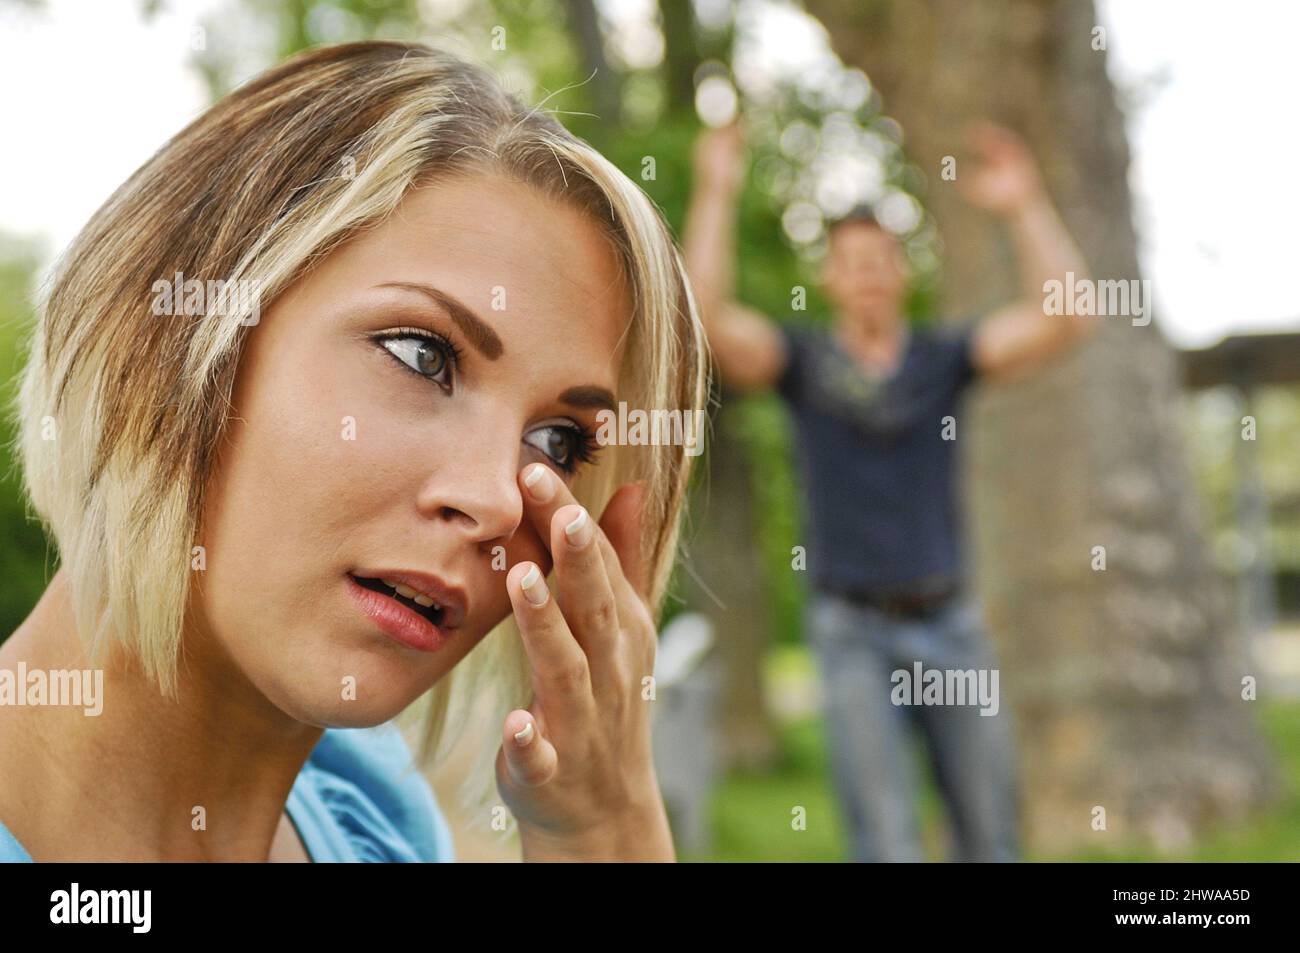 couple arguing, he gets upset, she cries Stock Photo